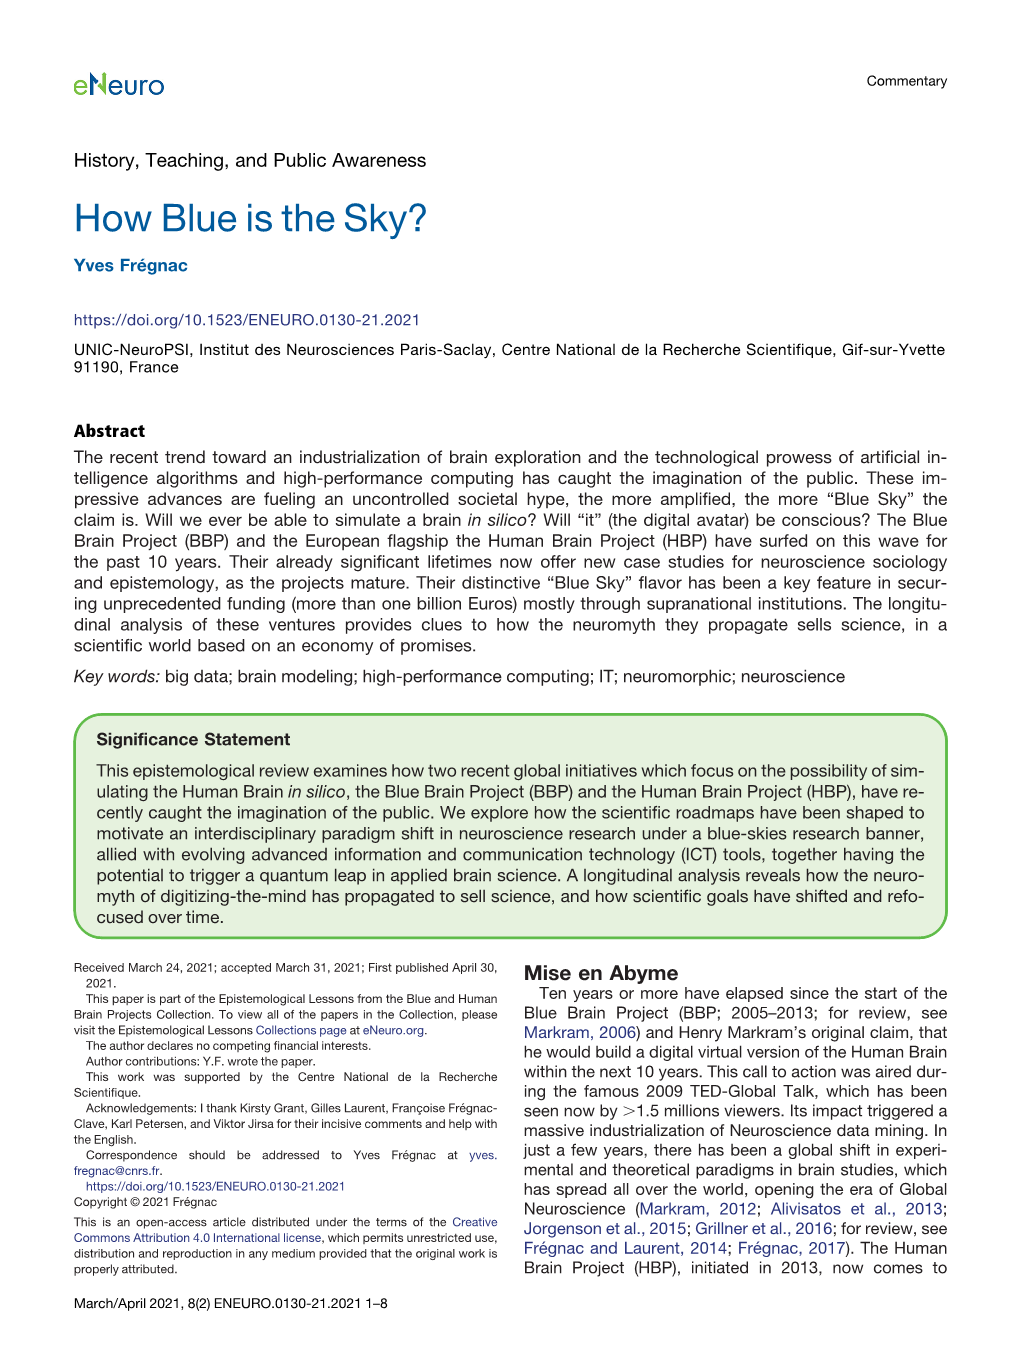 How Blue Is the Sky?